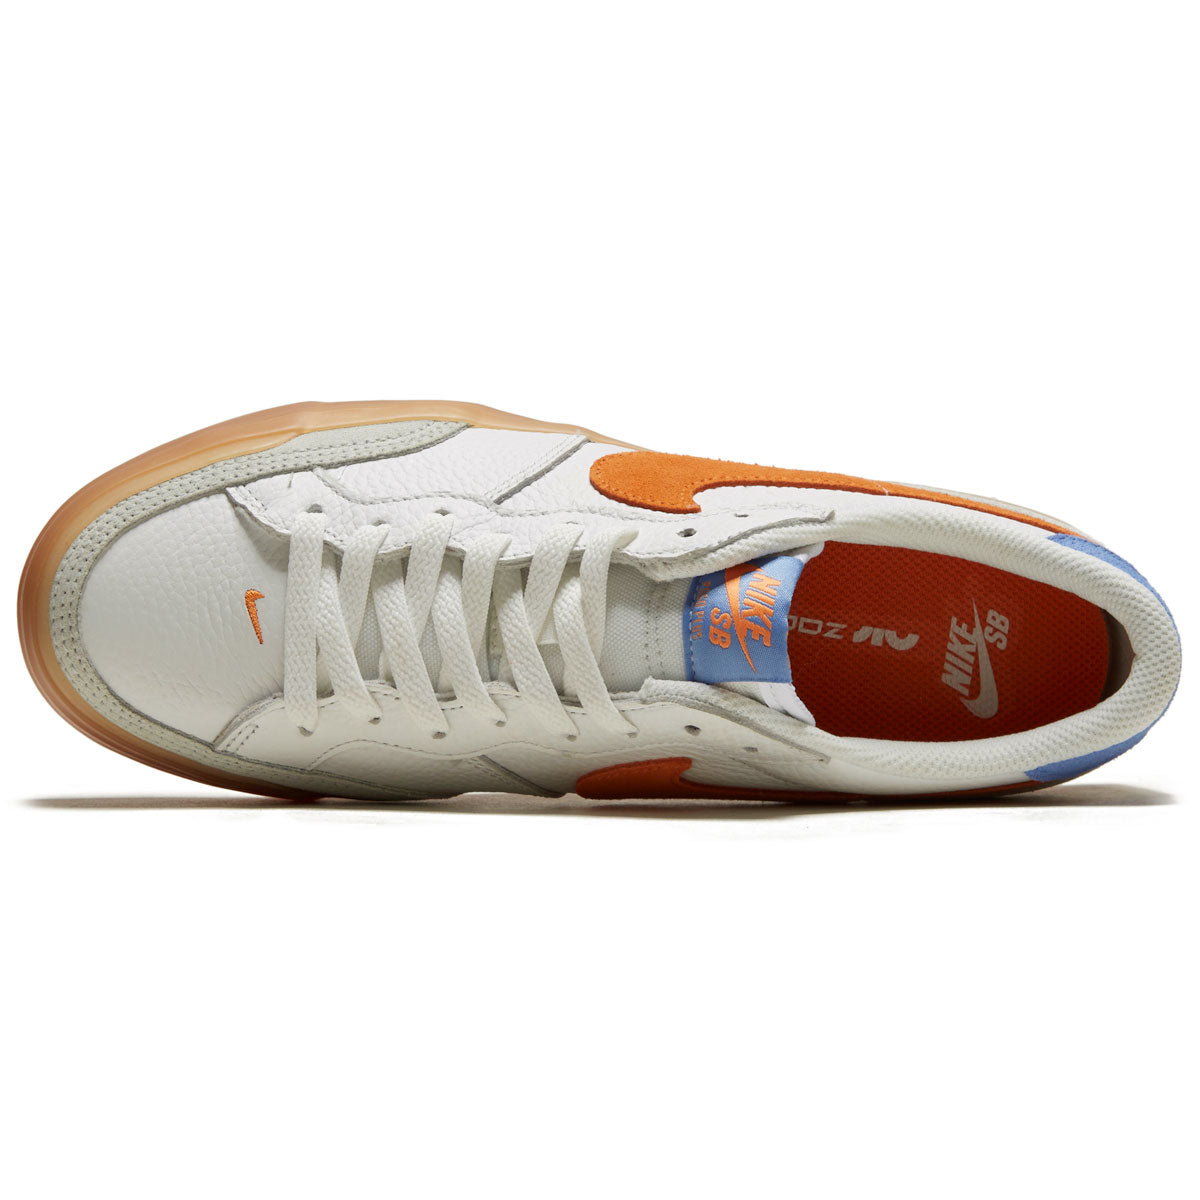 Shipping Outlaw Dead in the world Nike SB Zoom Pogo Plus Prm Shoes - Summit White/Bright Mandarin – CCS